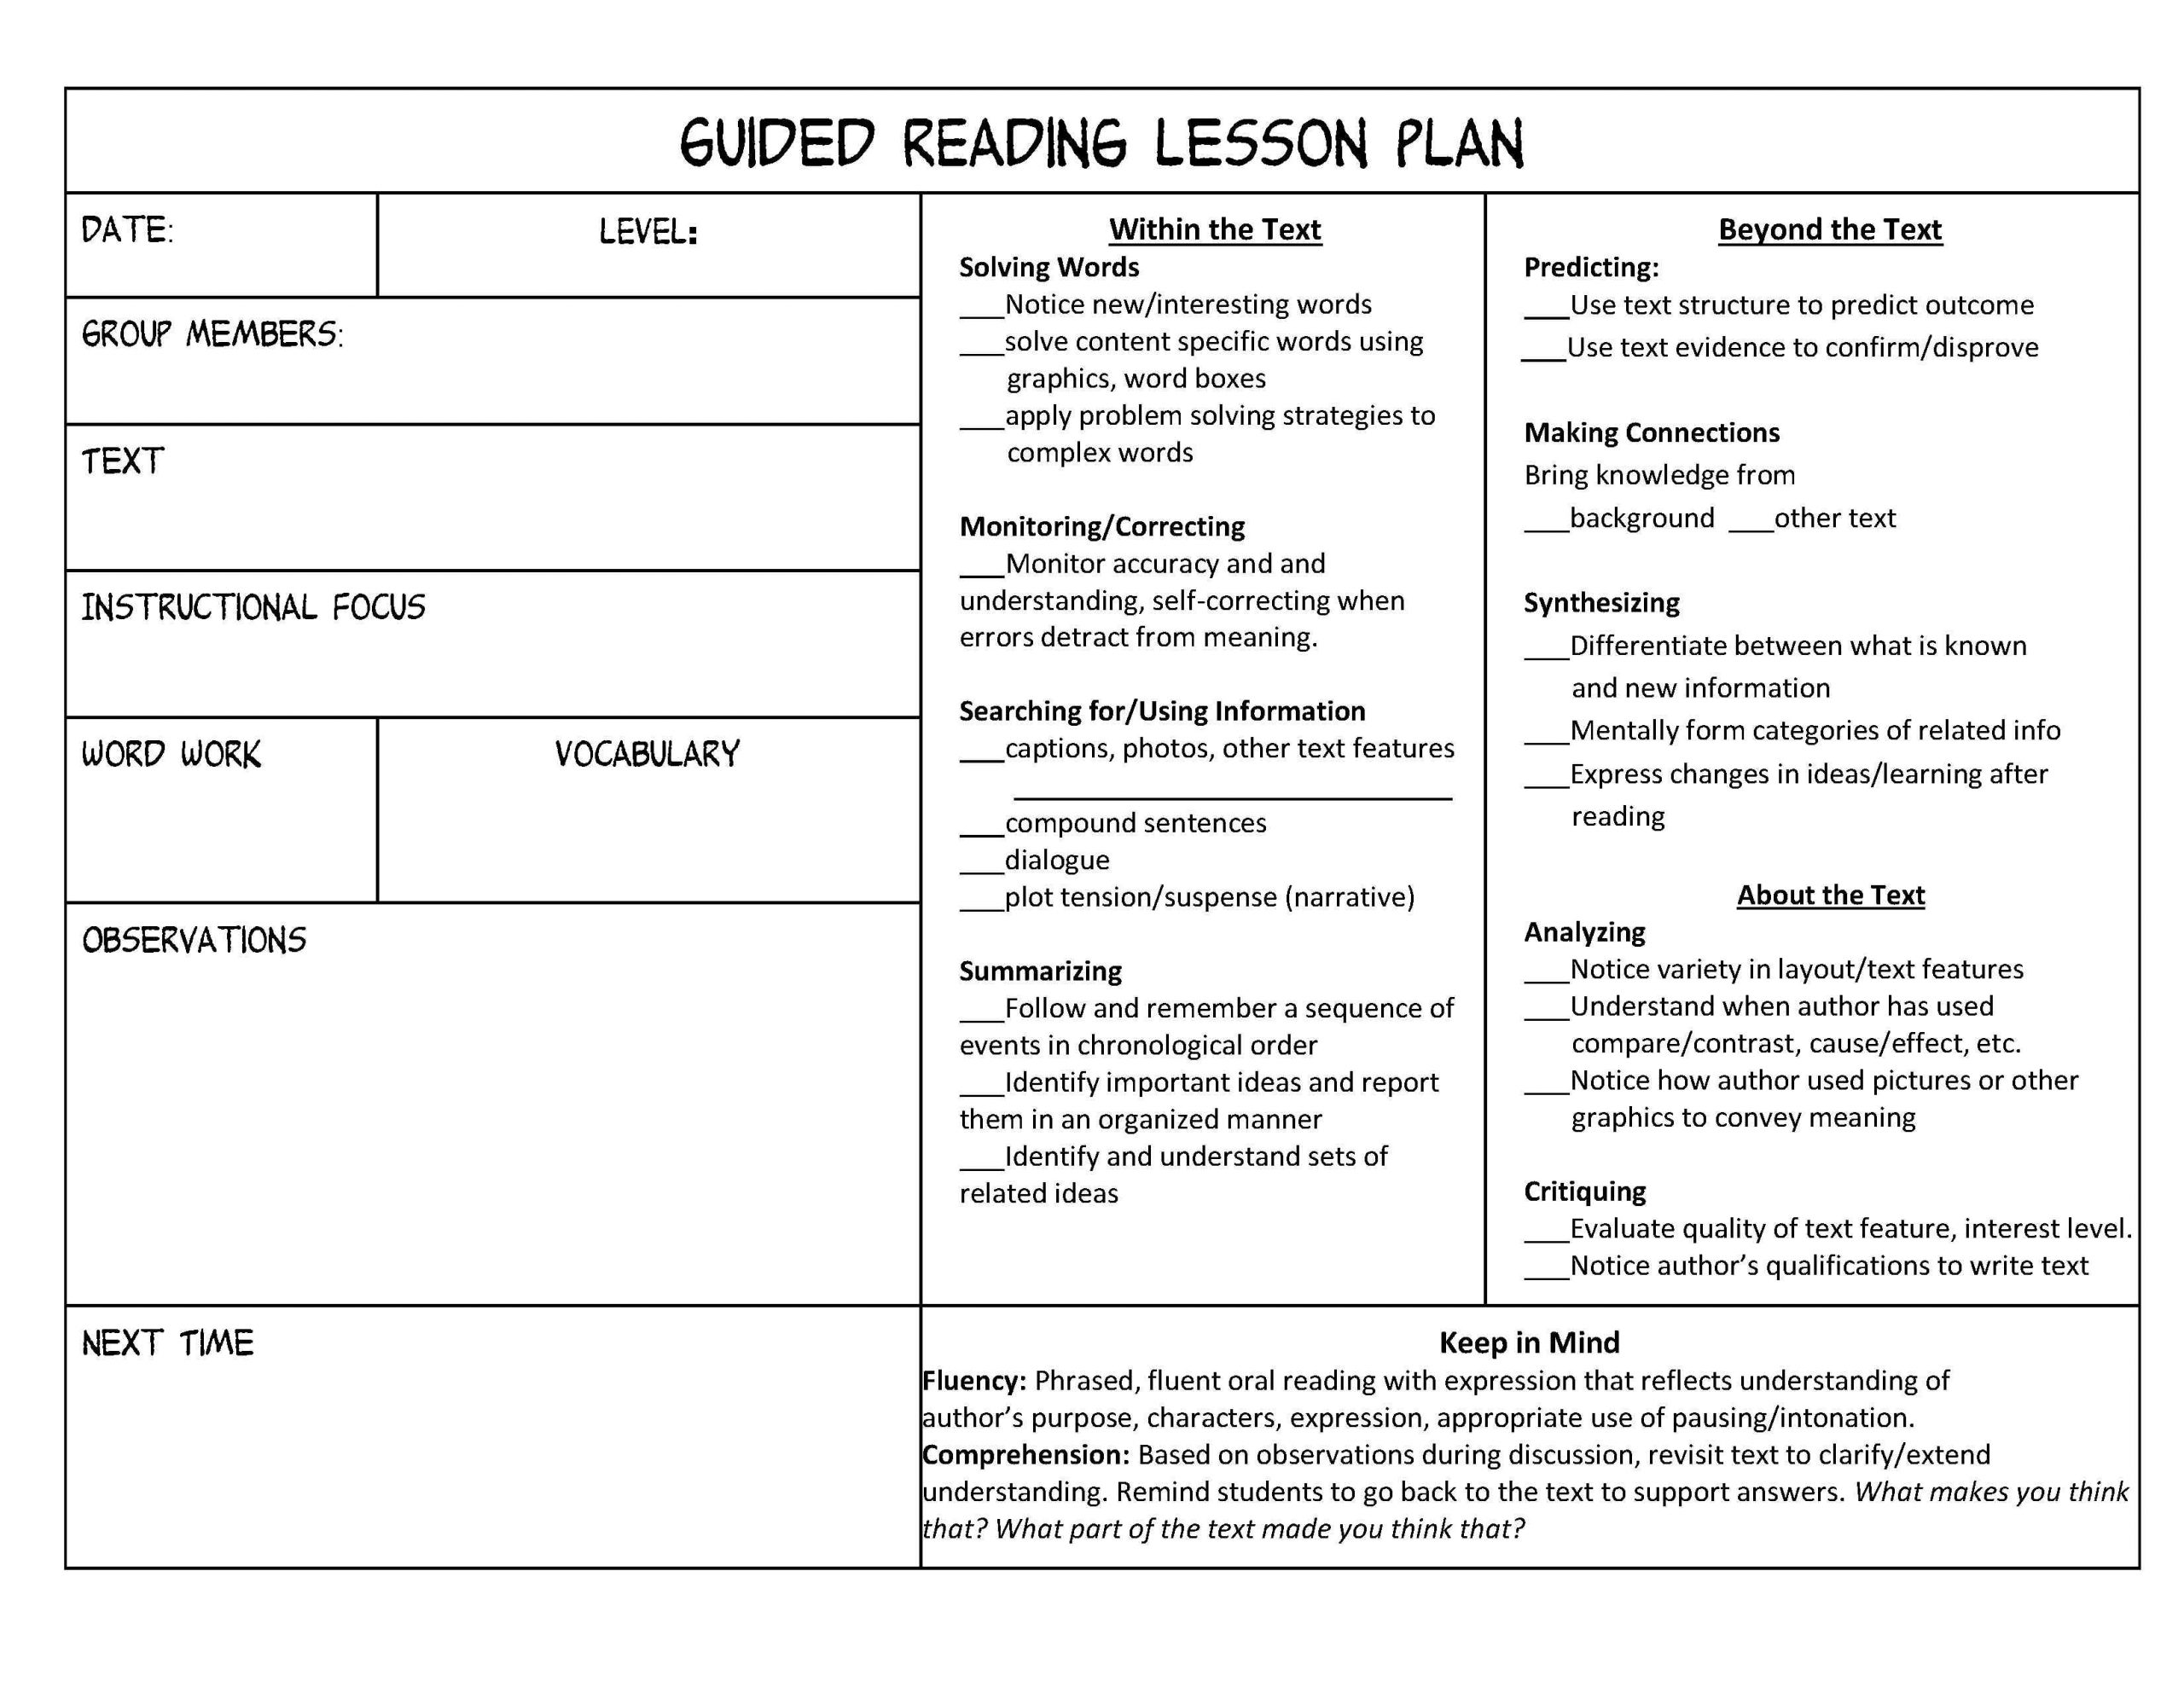 Guided Reading Organization Made Easy | Scholastic